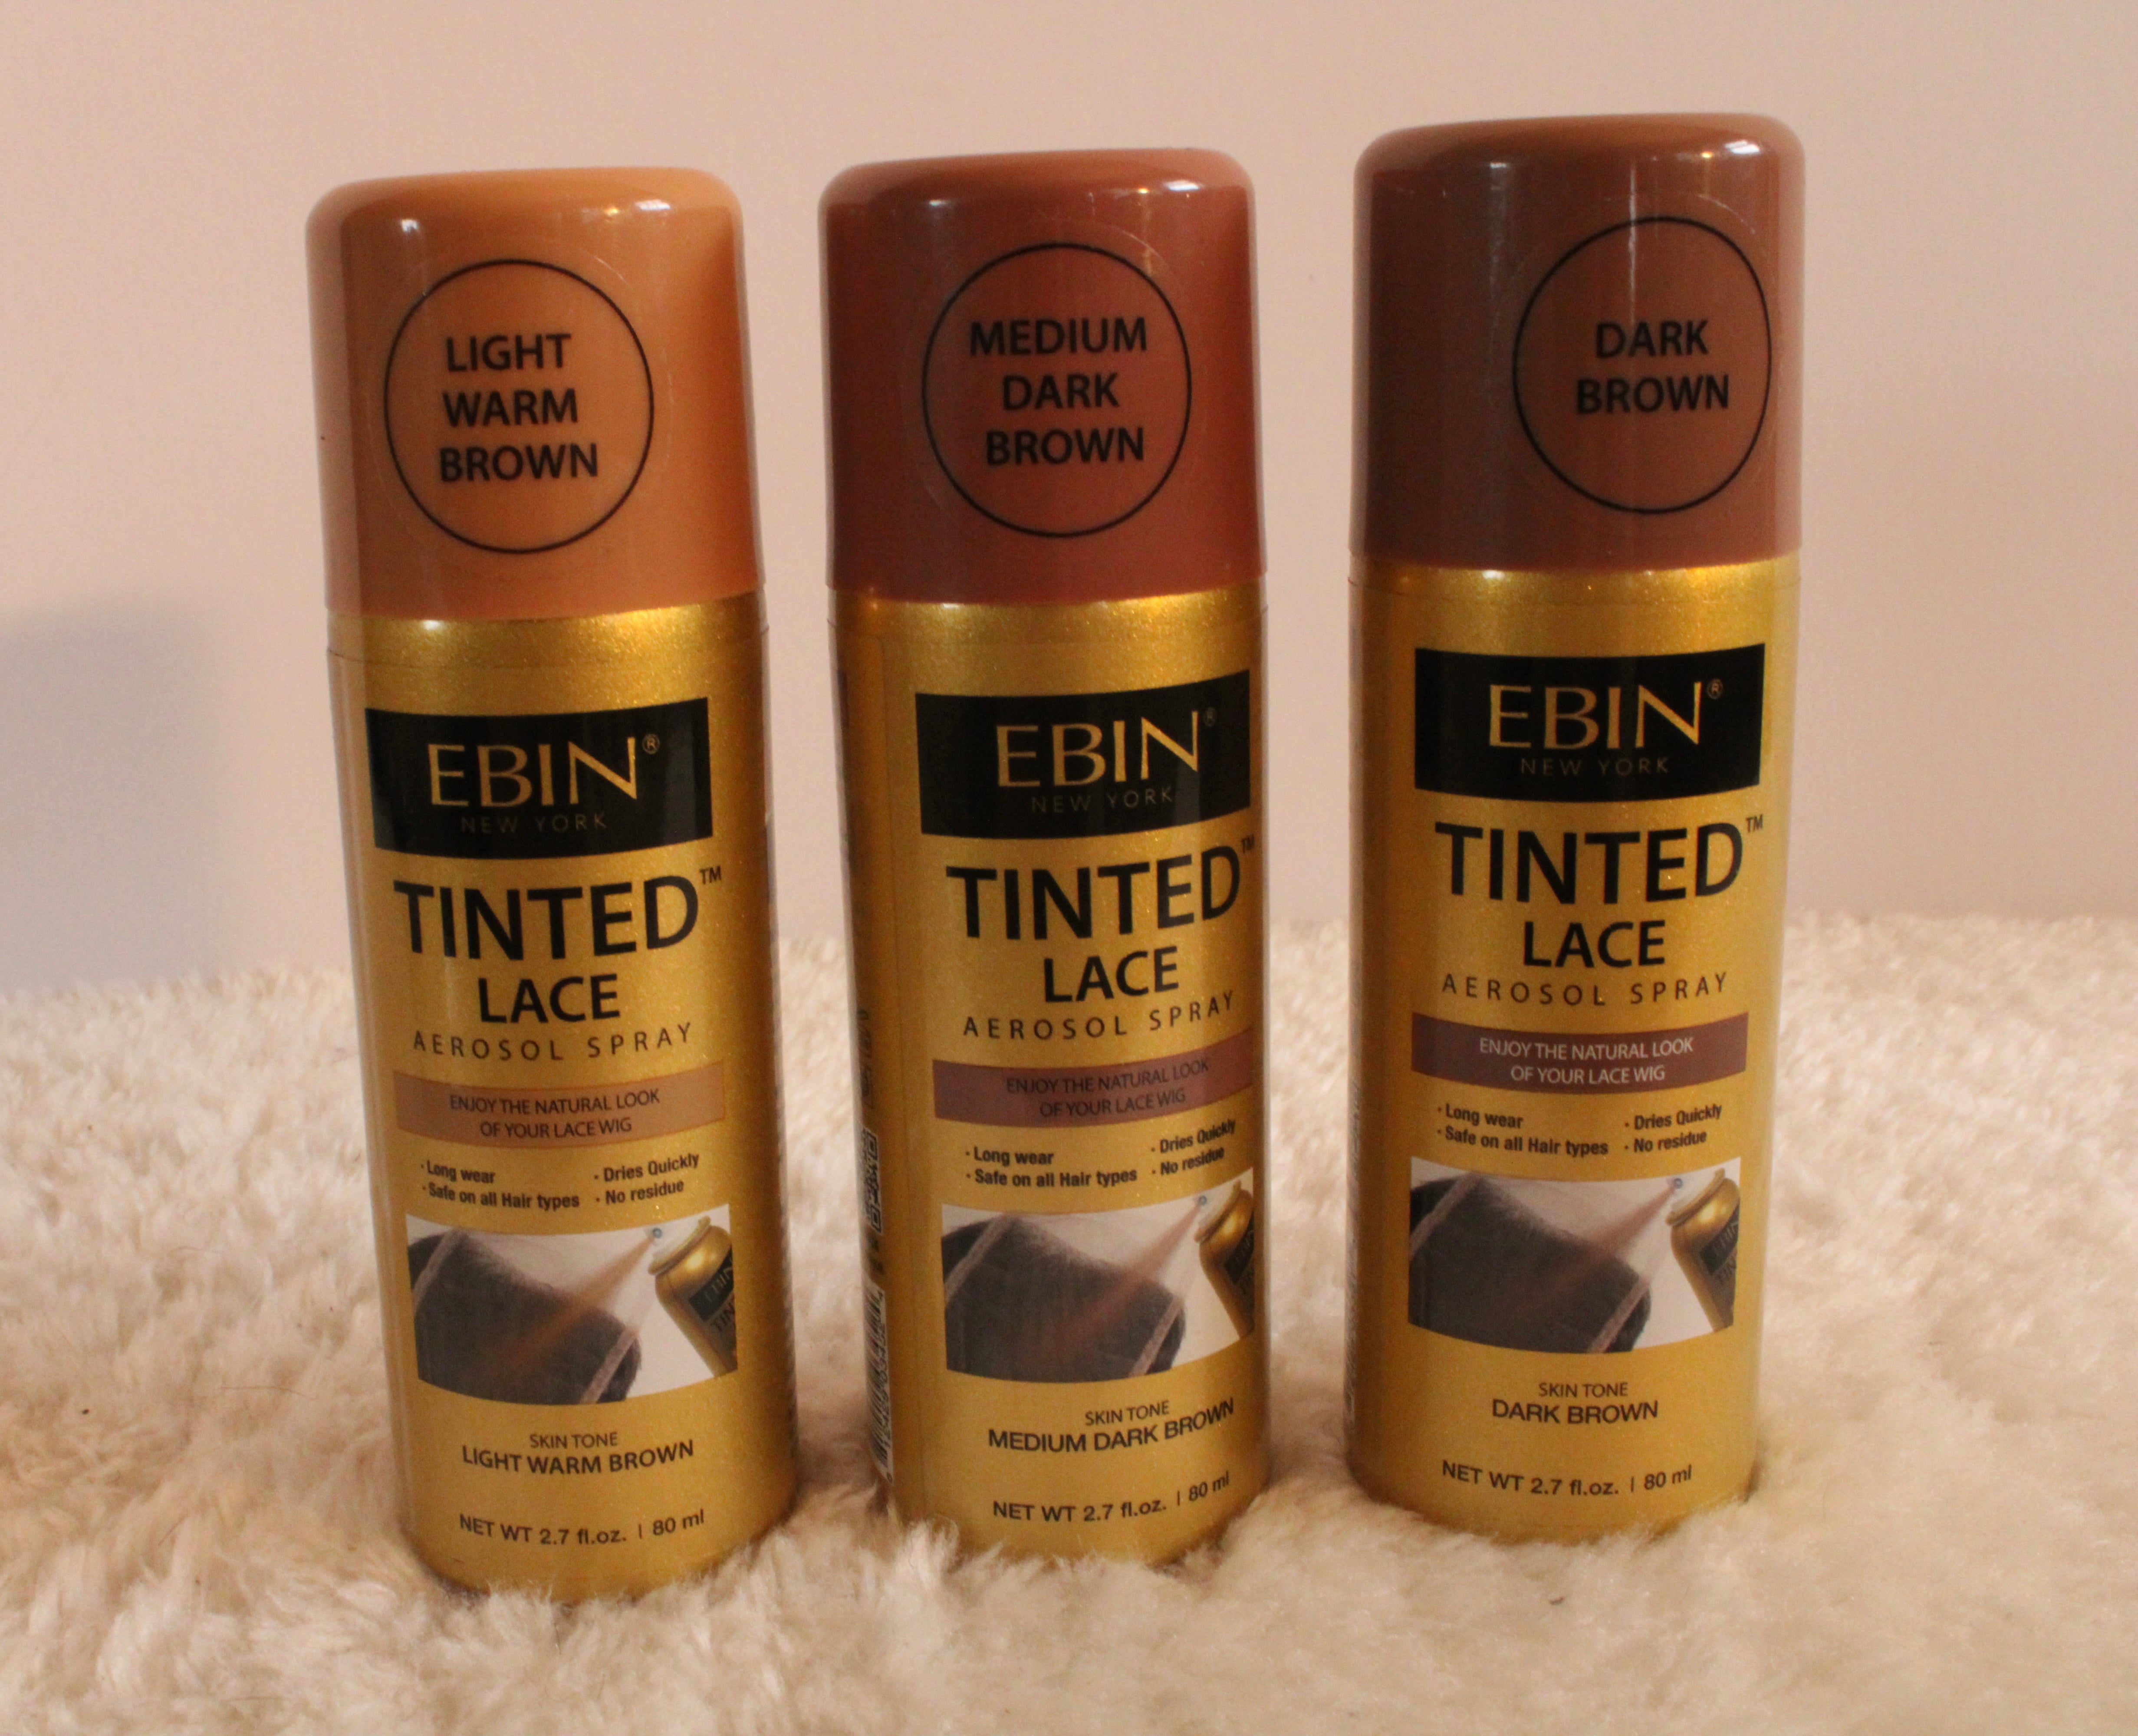 12 EBIN Tinted Lace Aerosol Spray for Lace Wigs Light Warm Brown 2.7 oz